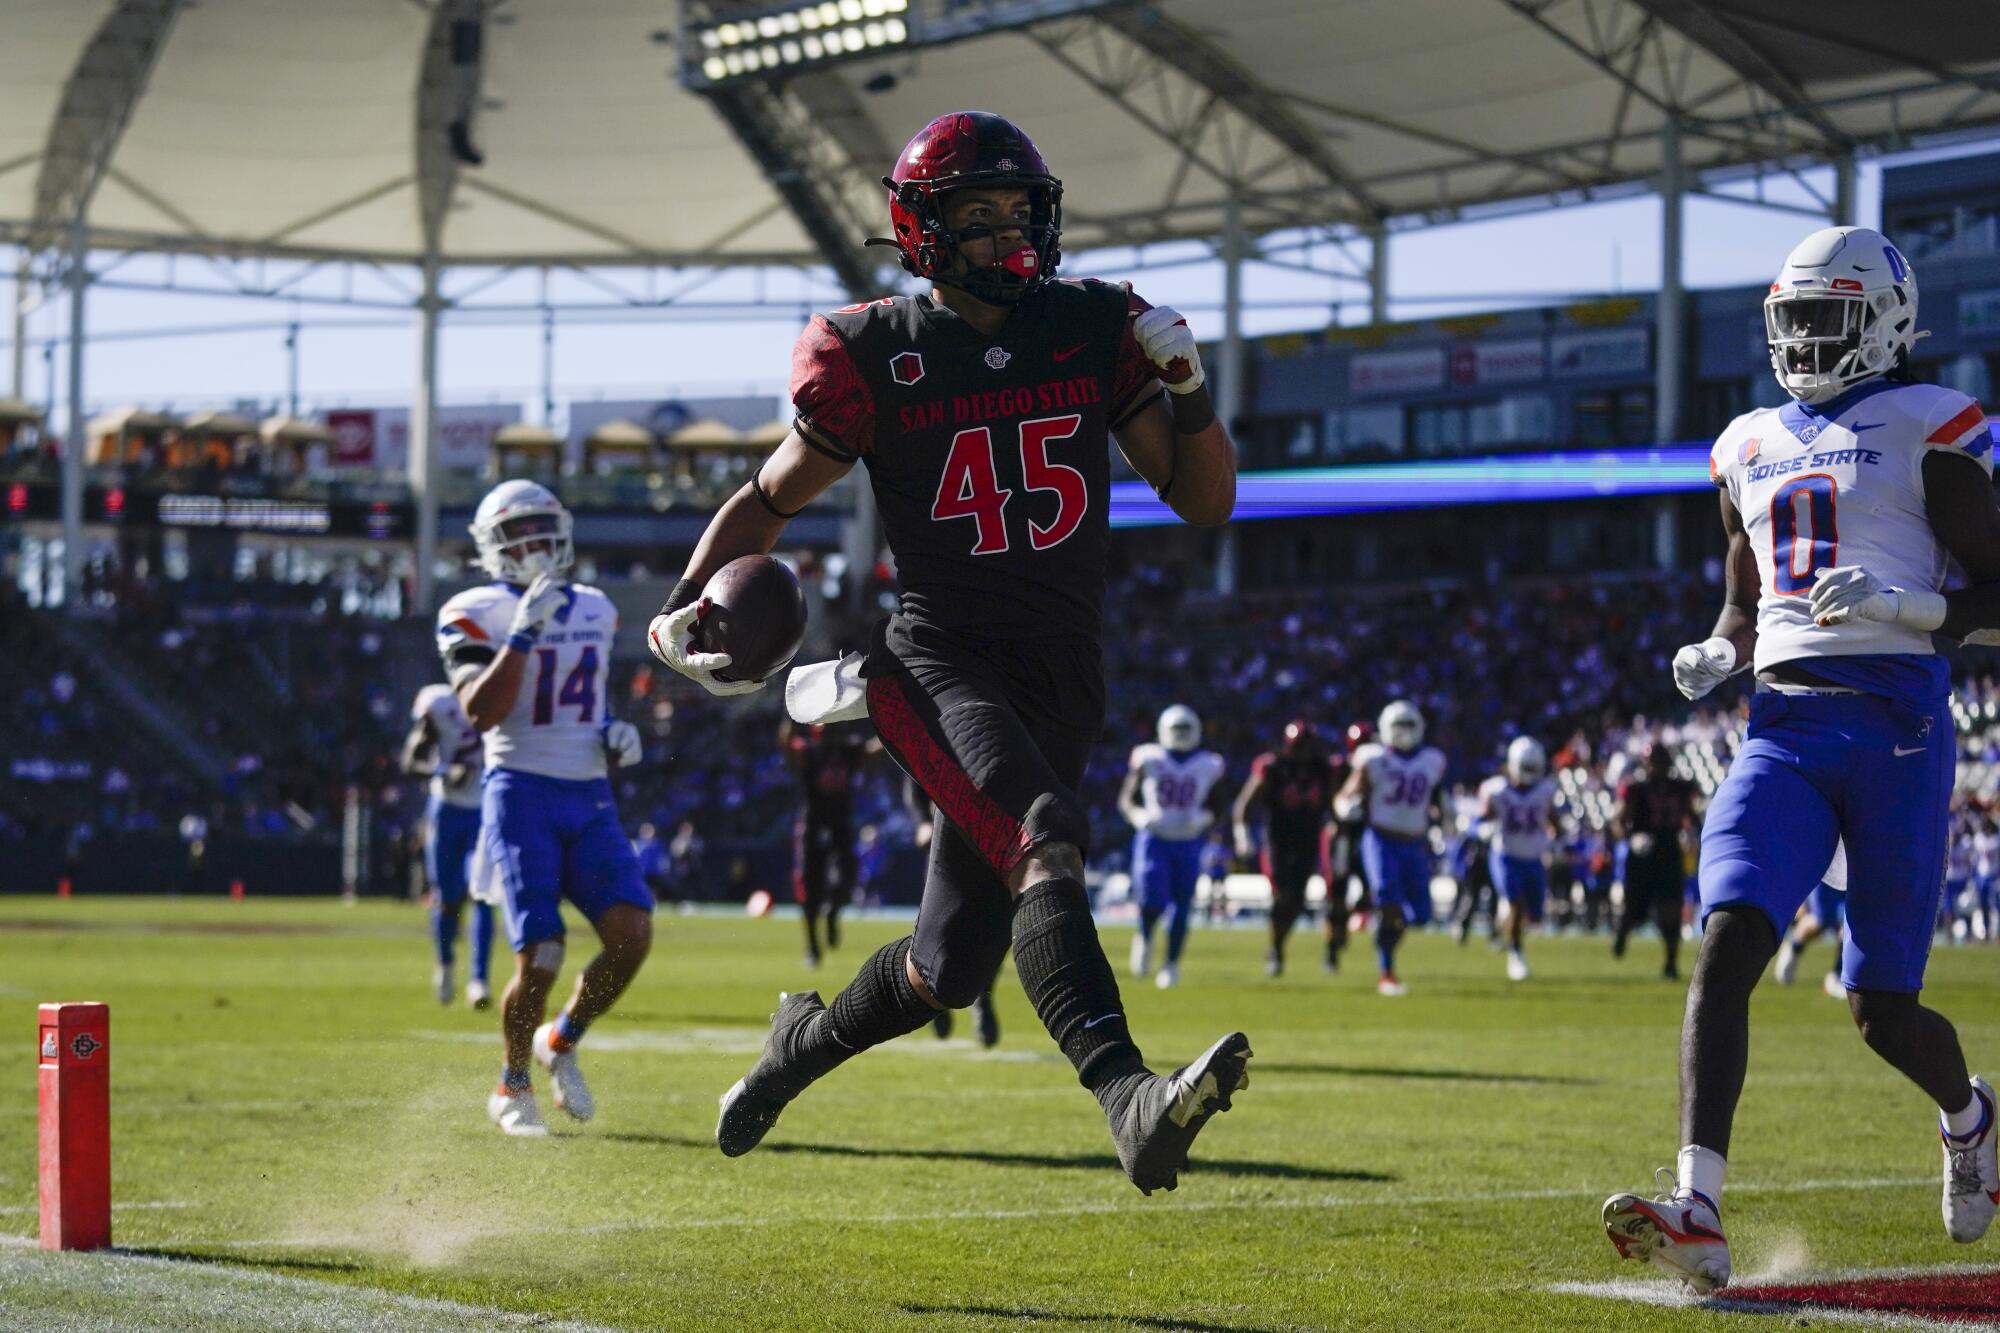 San Diego State's last "home game" against Boise State took place in 2021 in Carson.